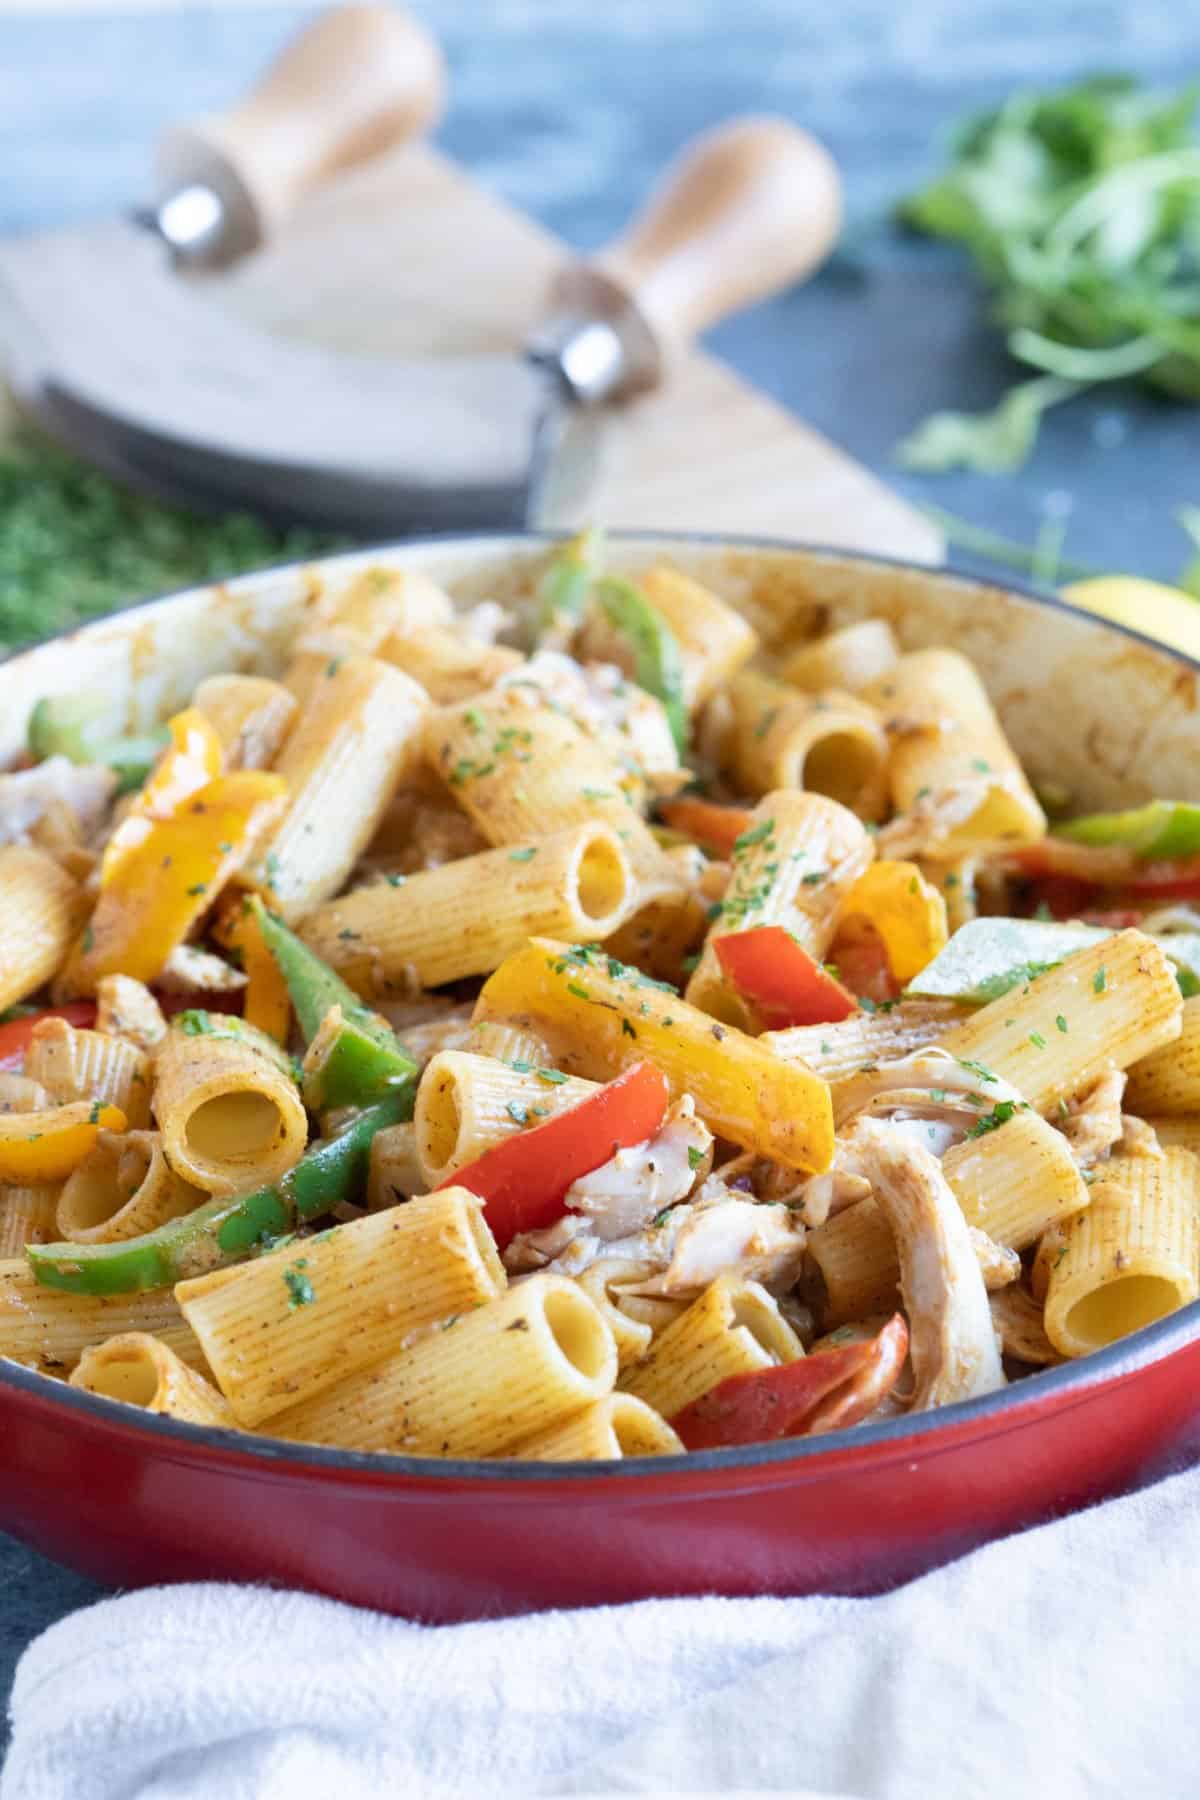 A pan of rasta pasta with sauteed bell peppers and chicken.